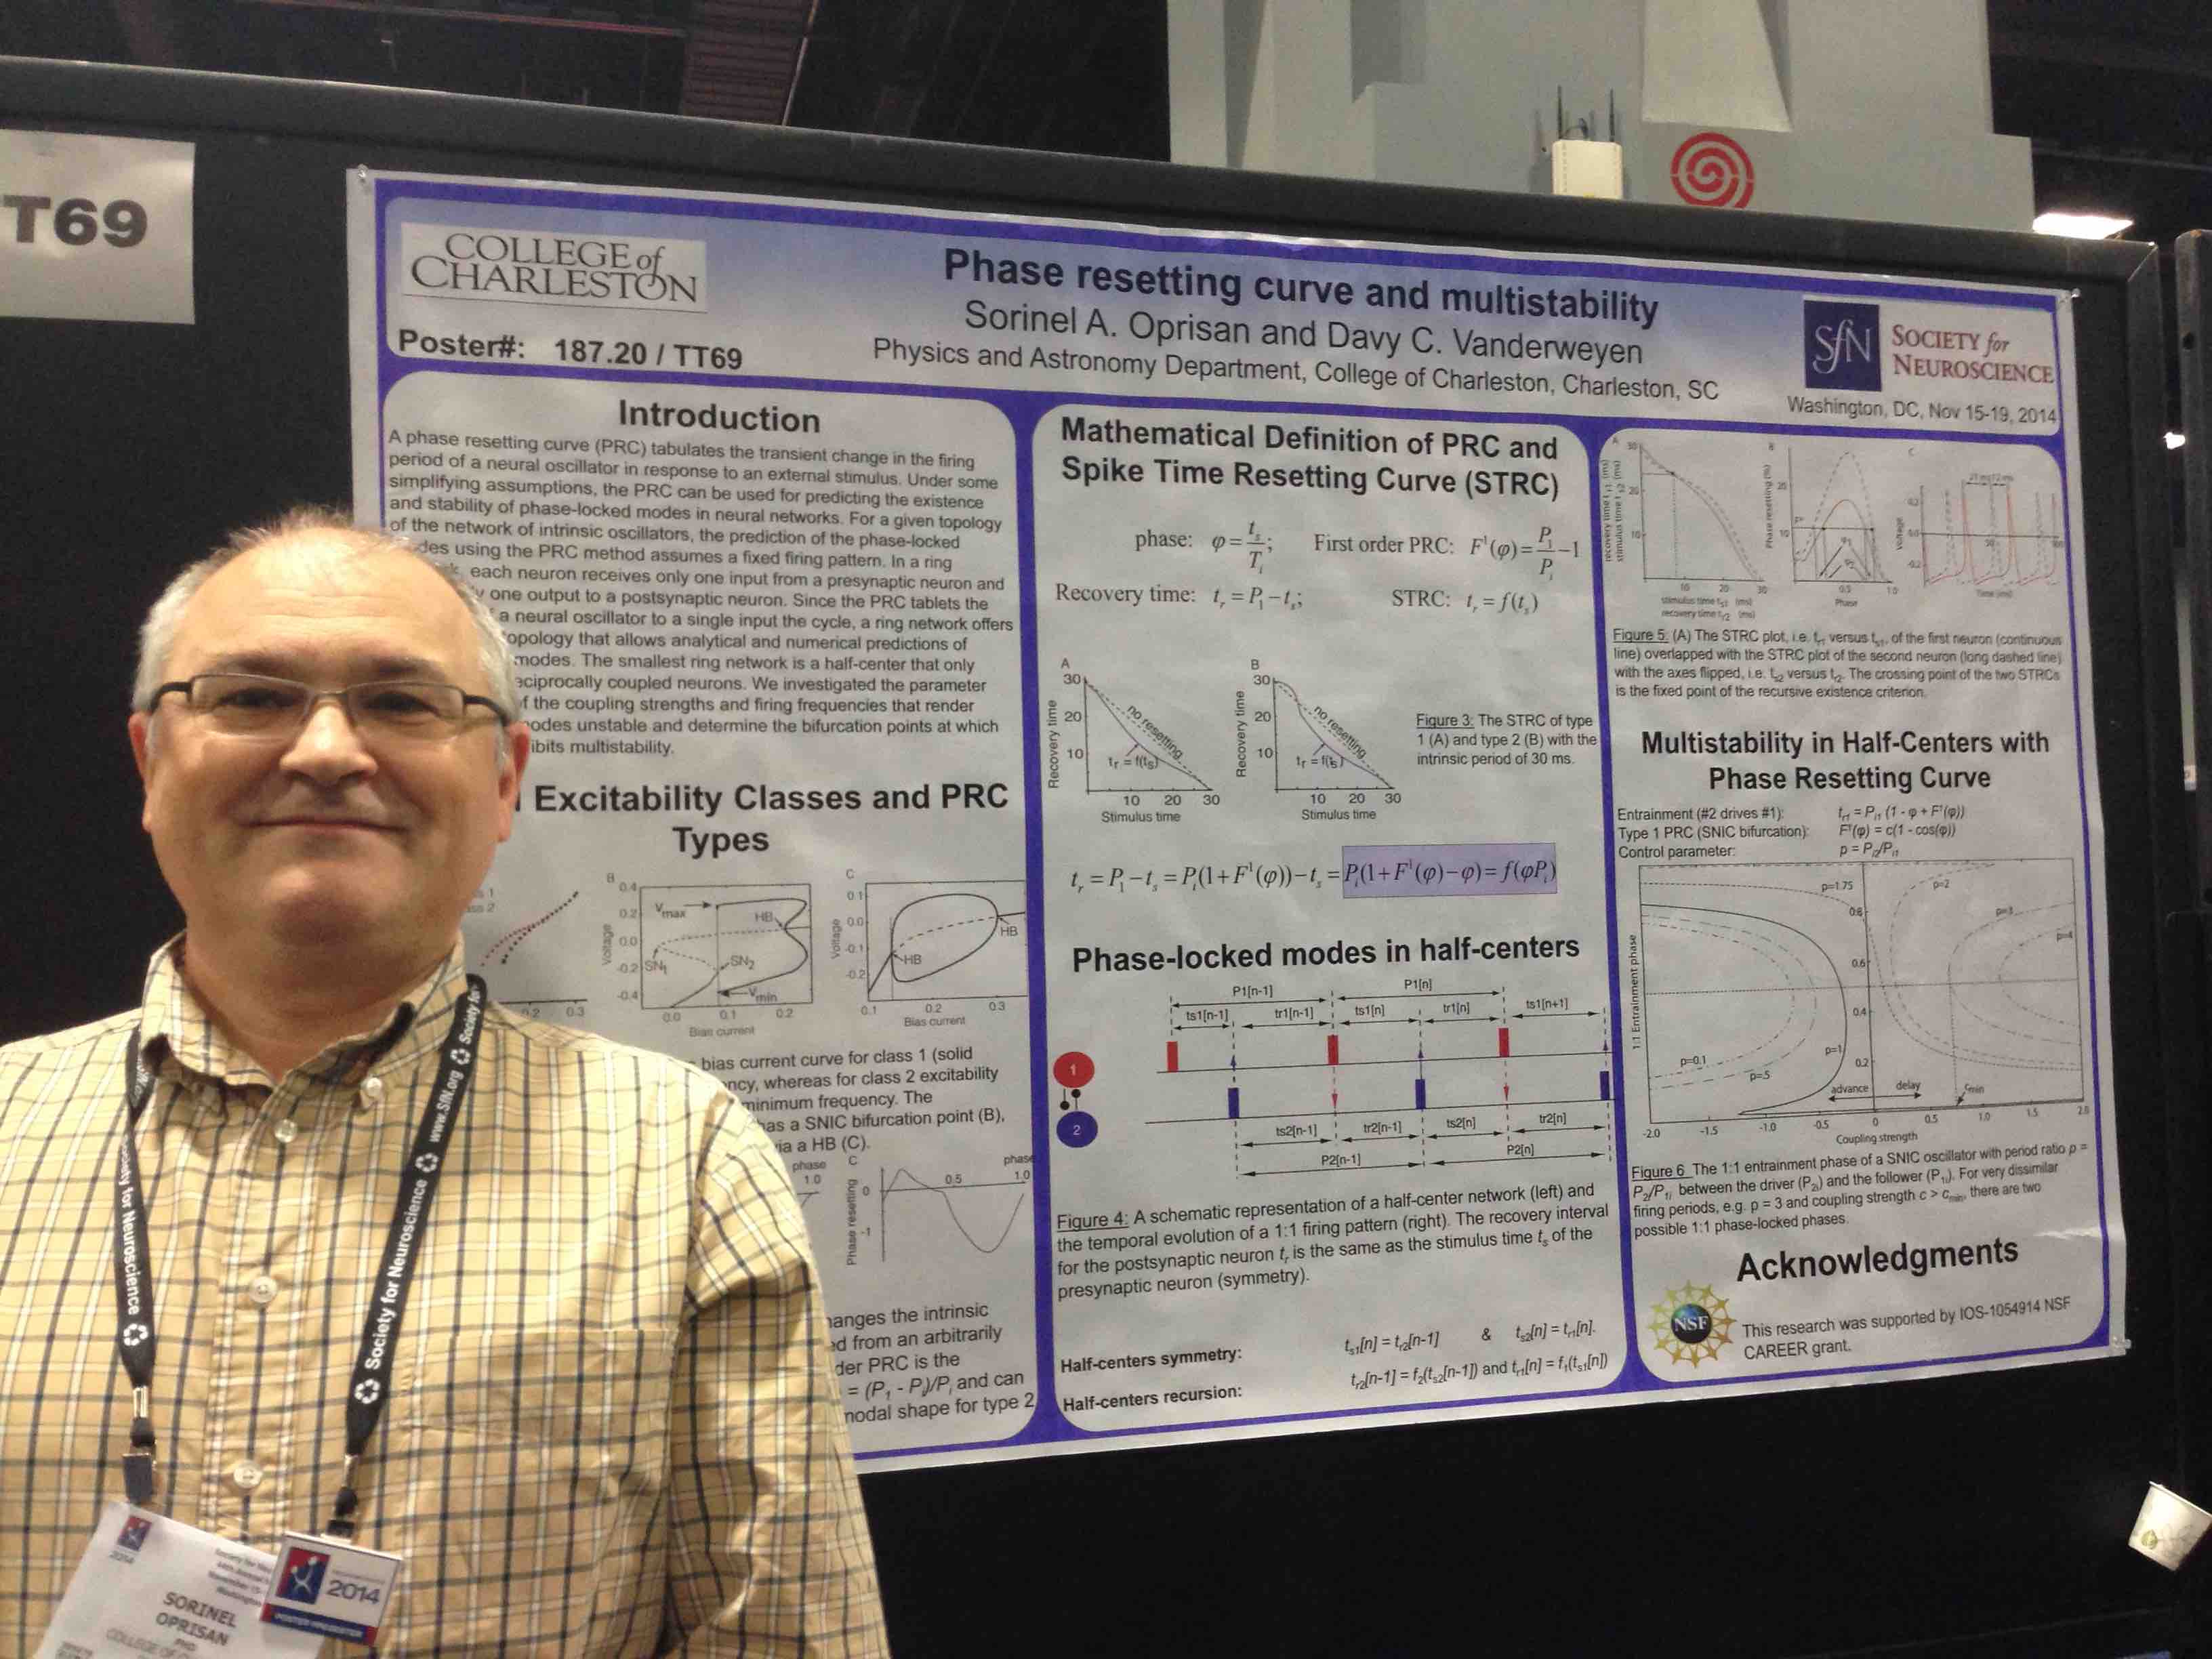 Dr. Oprisan at SFN Conference 2014